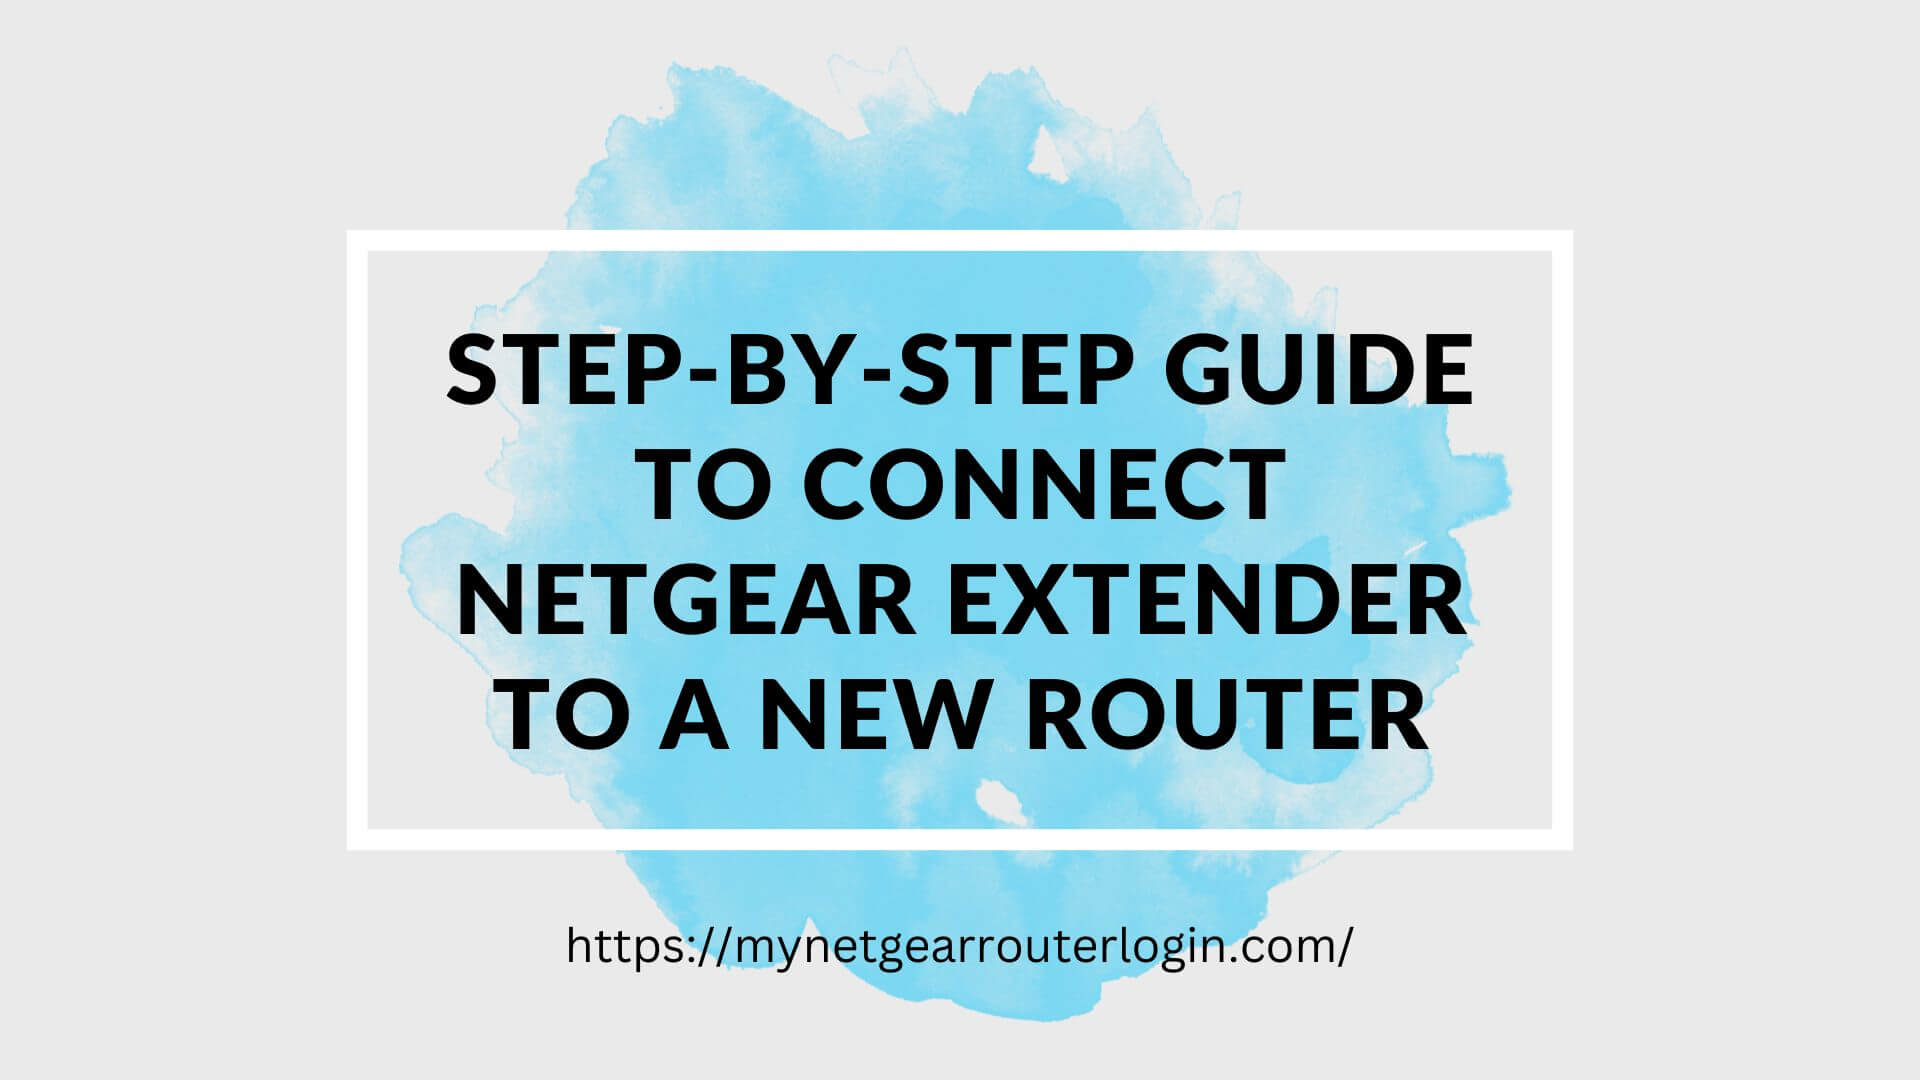 How To Connect Netgear Extender to a New Router? 2 Methods